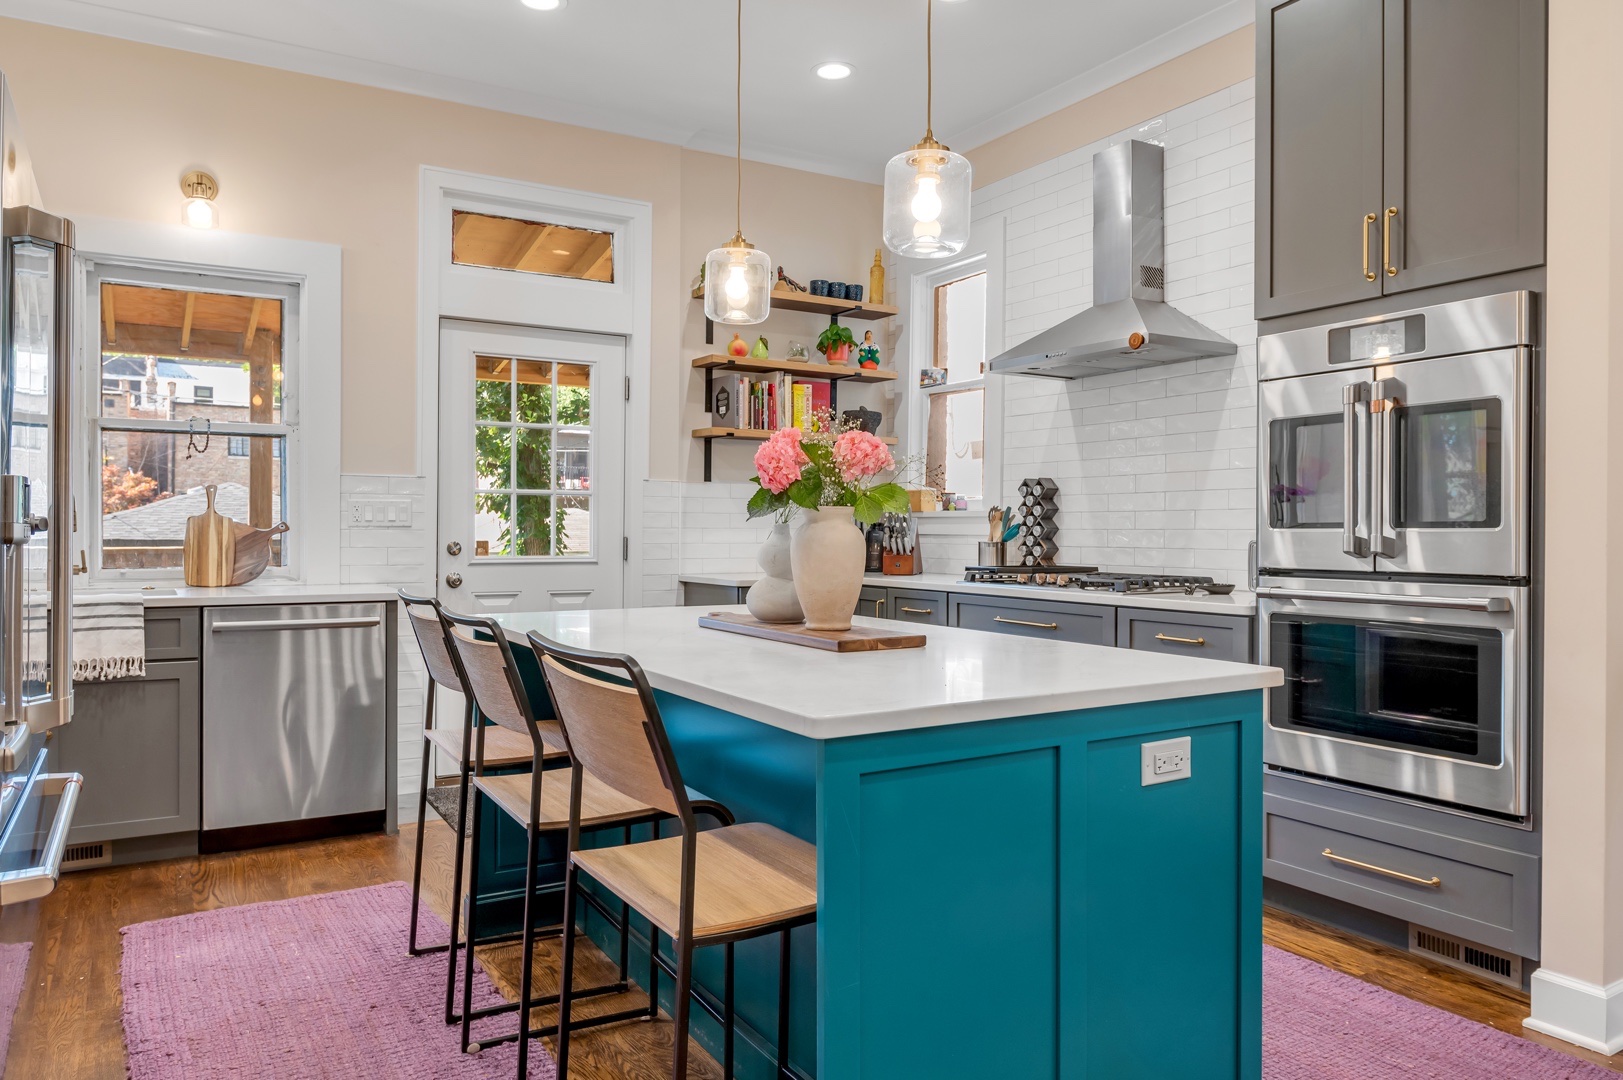 Kitchen remodel with two tone cabinets, white quartz countertop, wood floors, open shelving, brass hardware, stainless steel appliances, pendants, can lights, and subway tile